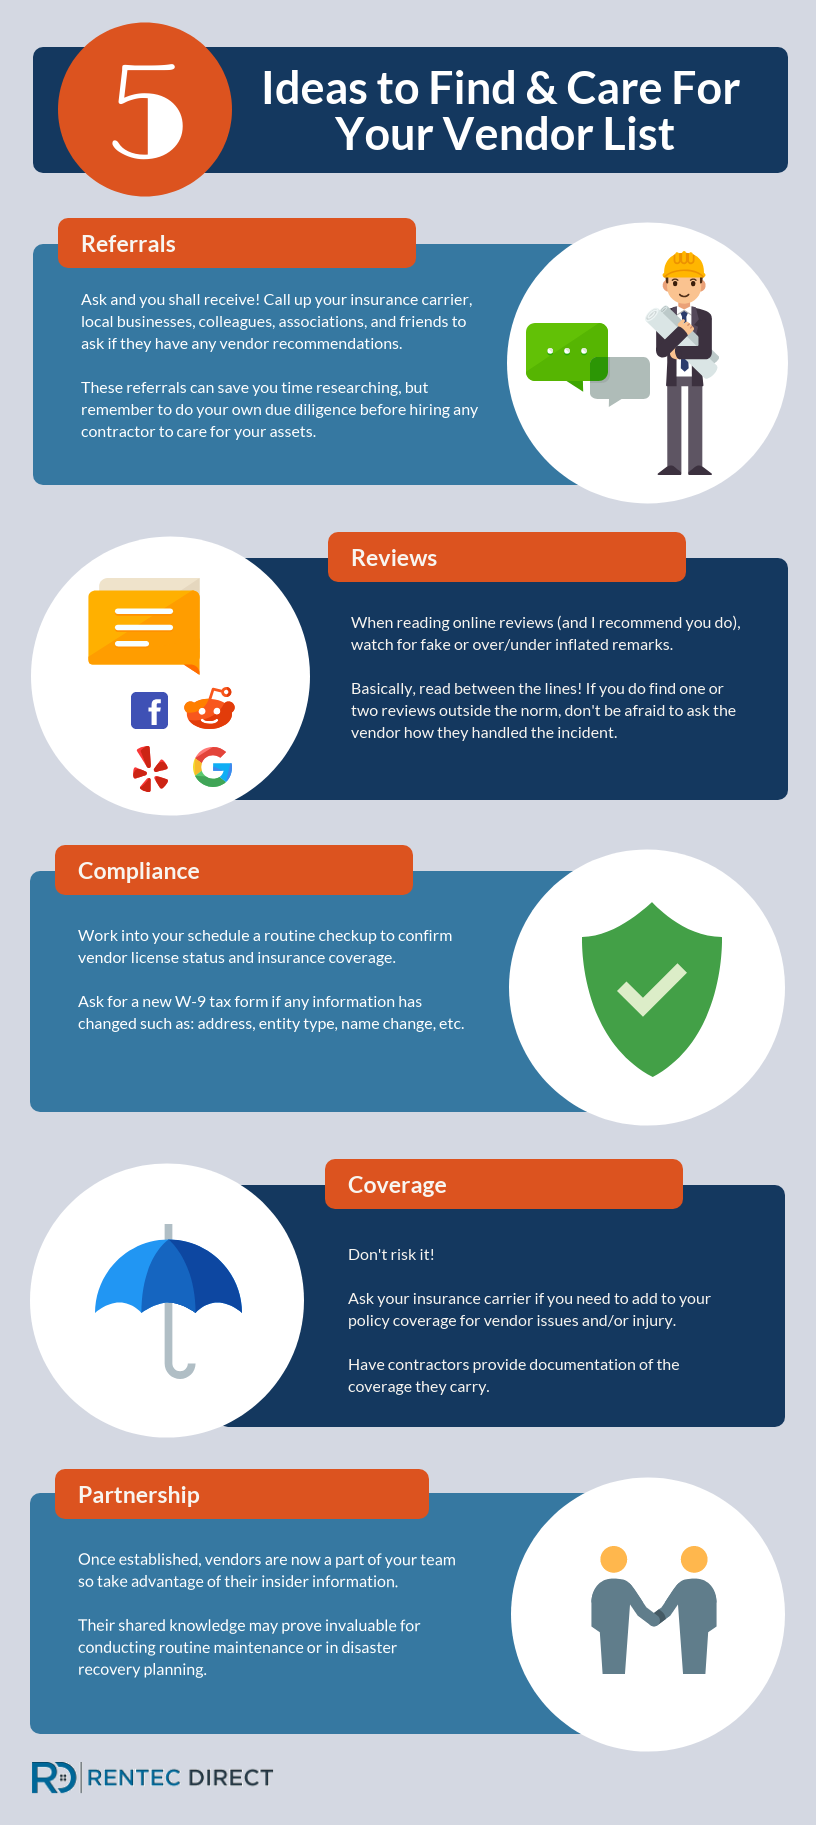 This infographic gives five ideas to find and care for your vendor list including: ask for referrals, check online reviews, confirm compliance, check with your insurance carrier, and team building 